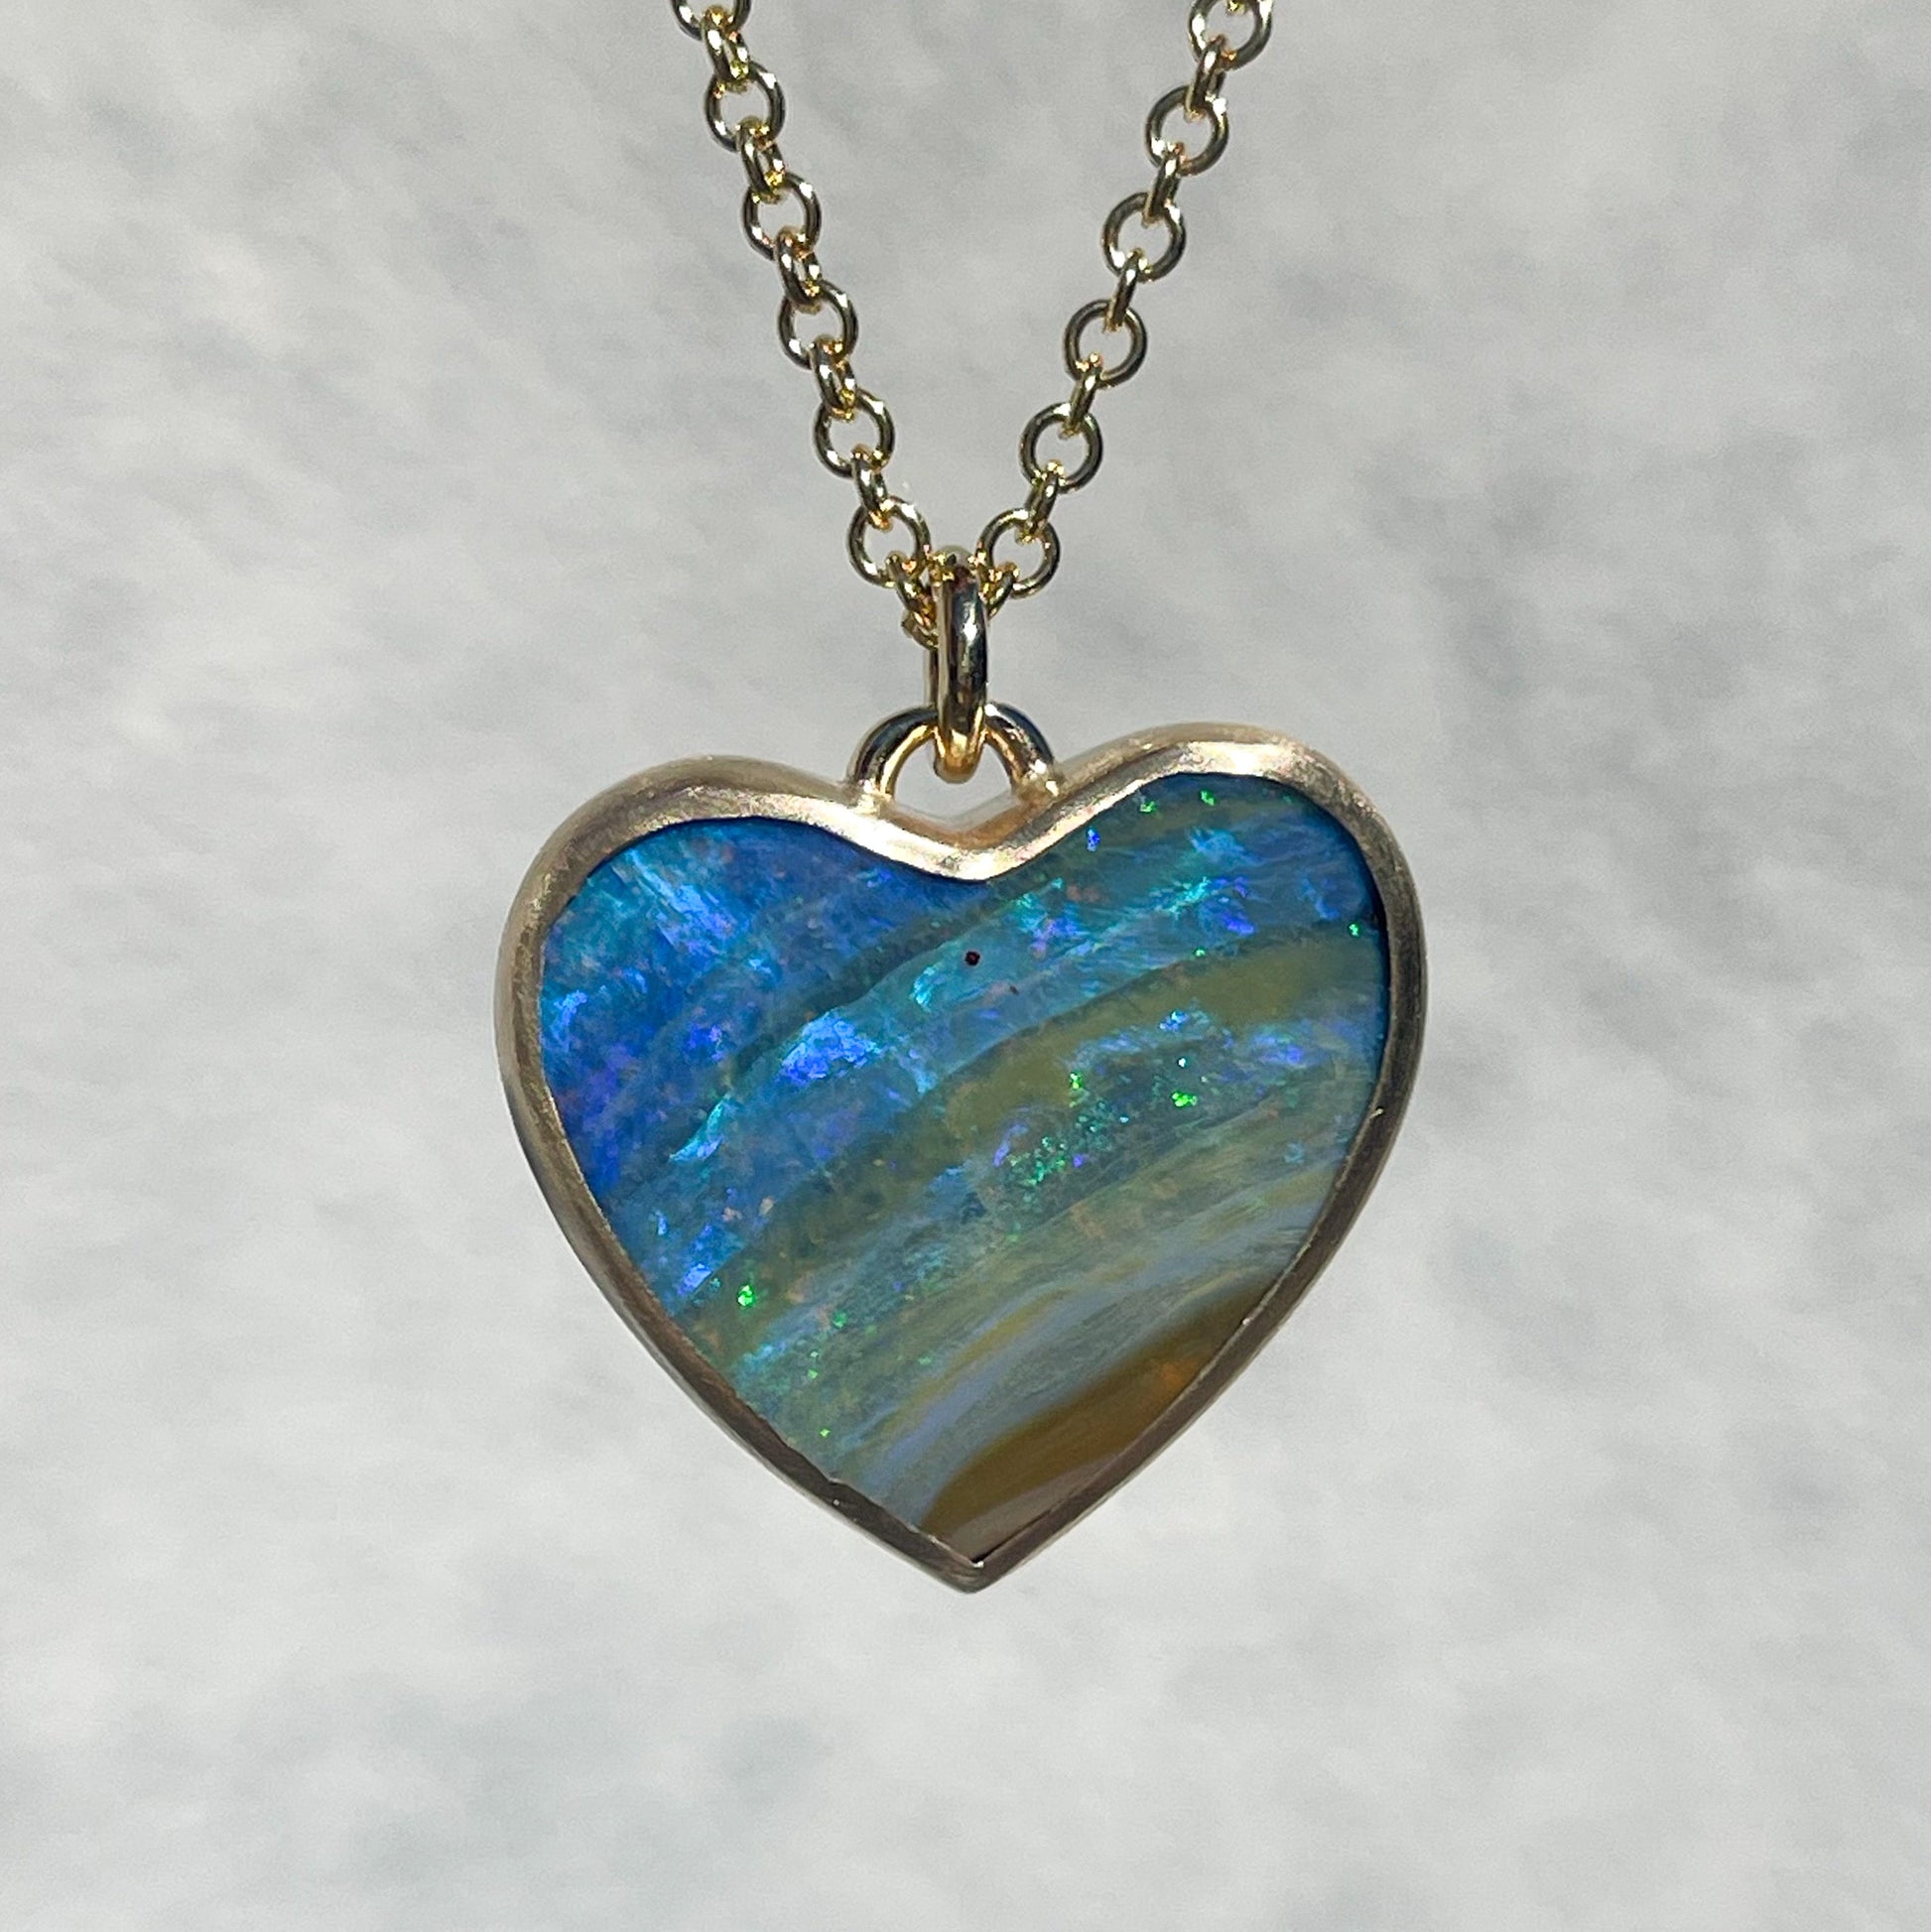 An Australian Opal Necklace by NIXIN Jewelry with a natural opal stone set in yellow gold.